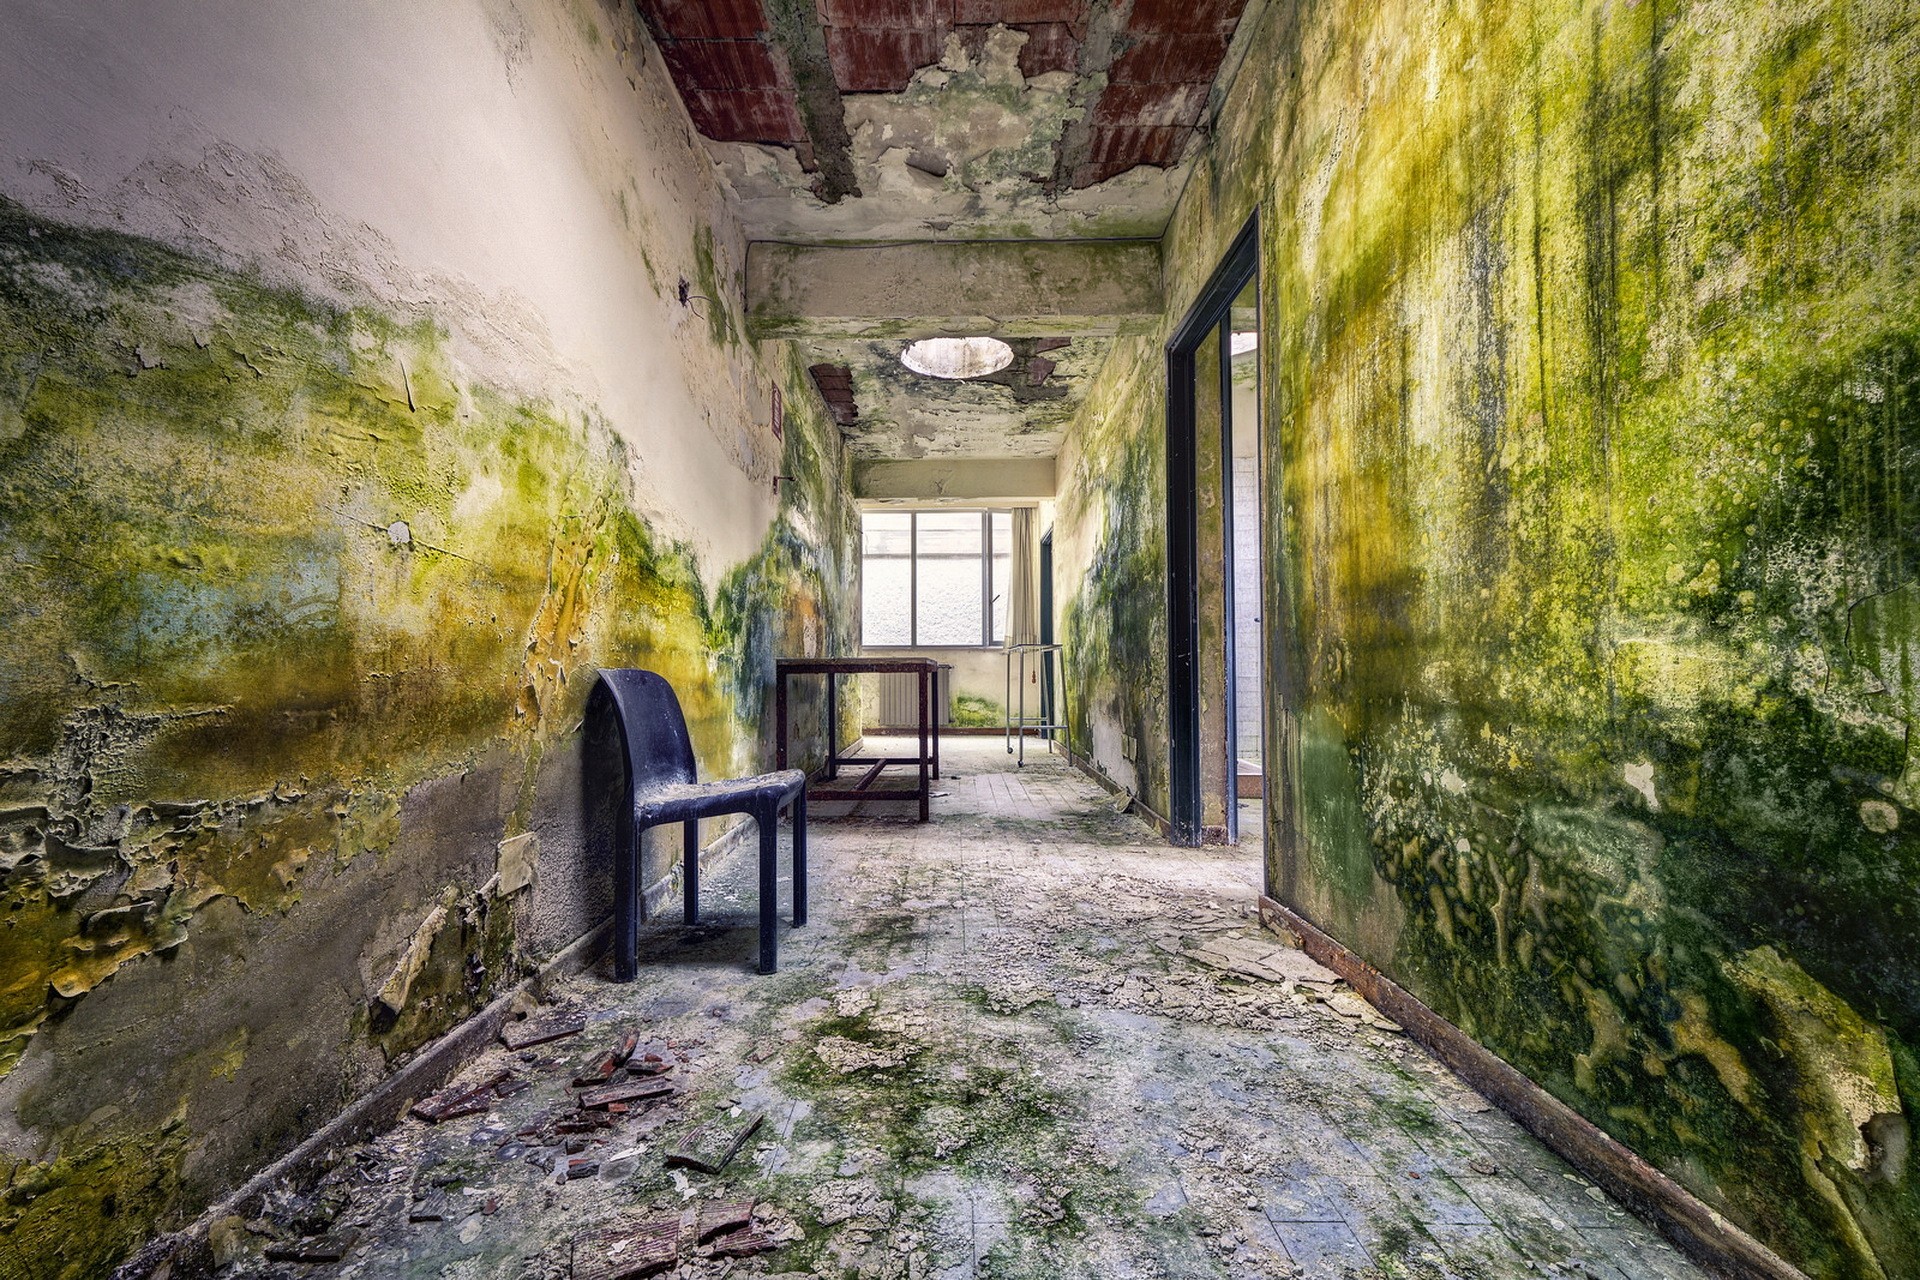 General 1920x1280 hallway building chair indoors ruins abandoned